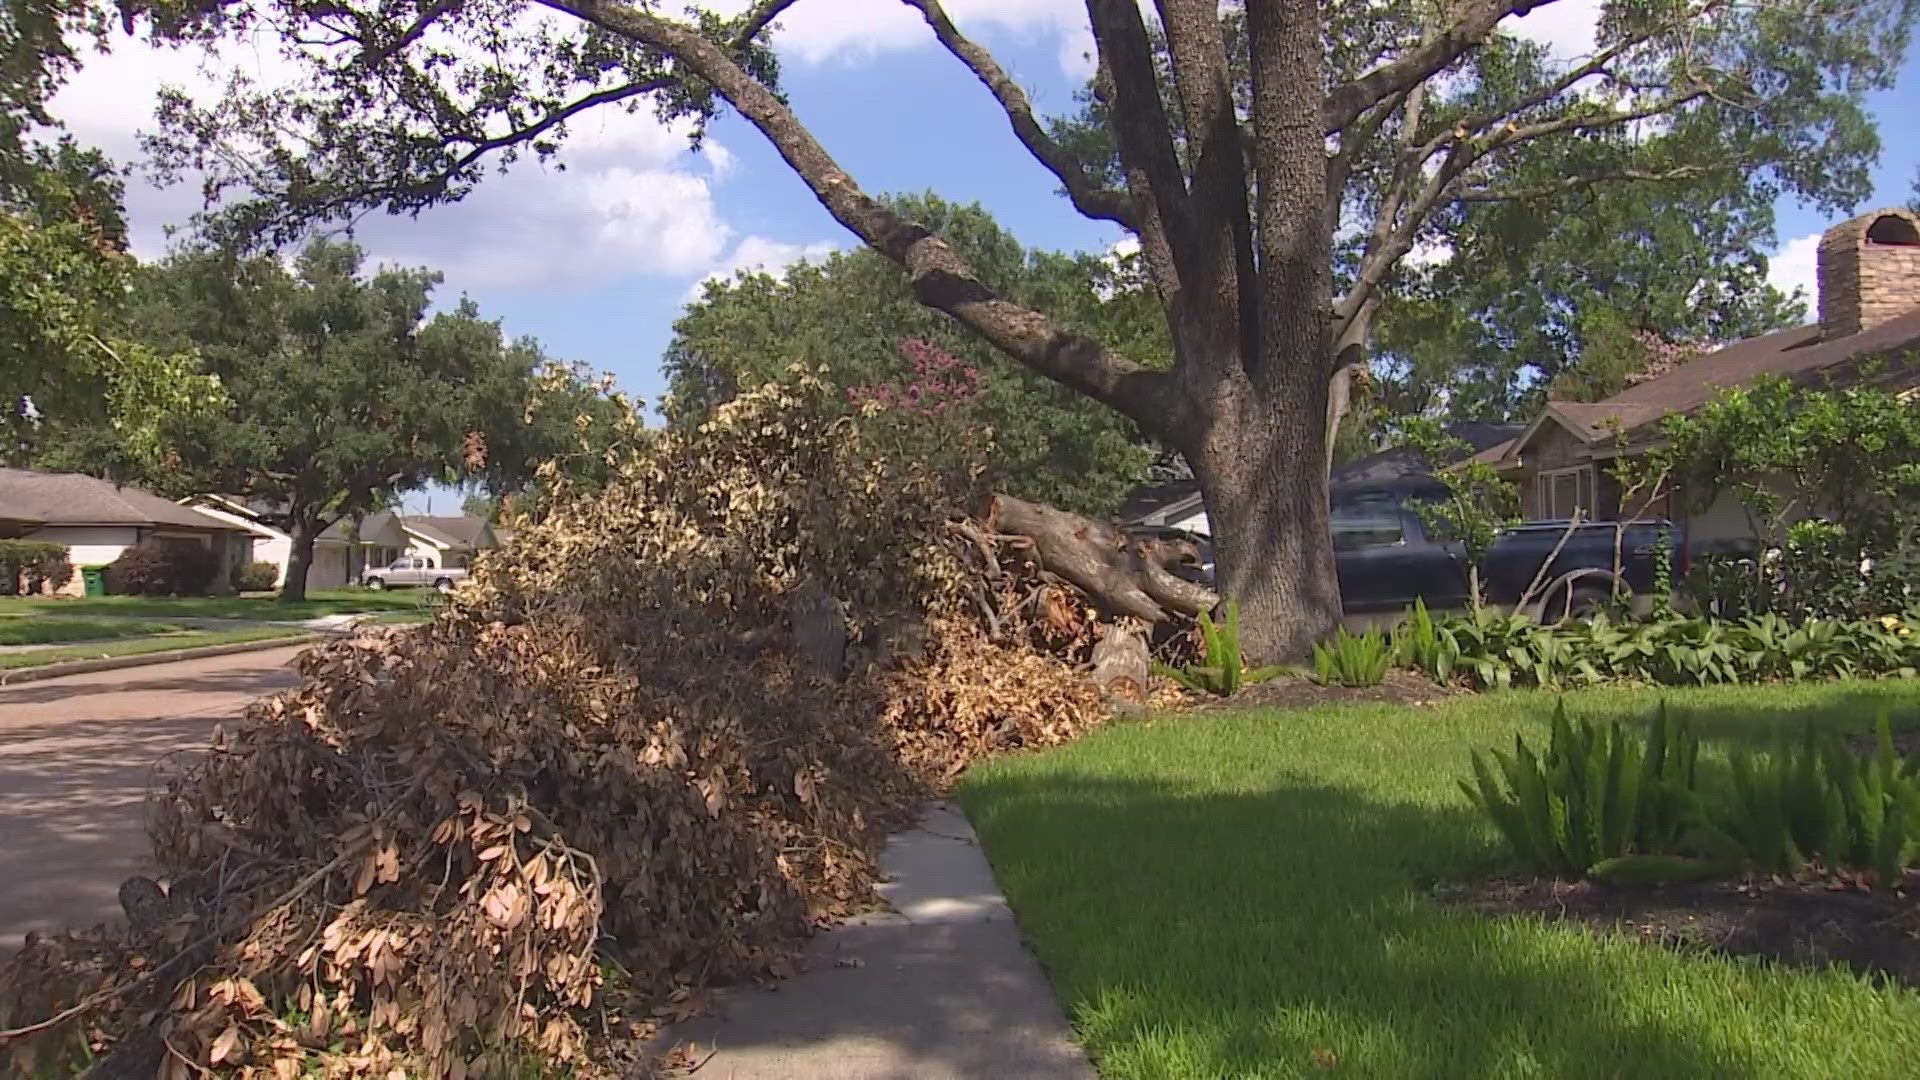 KHOU 11 spoke with Conrad Fertitta two weeks ago about the pile of debris left in his front yard. He's worried that the debris is still there with rain on the way.